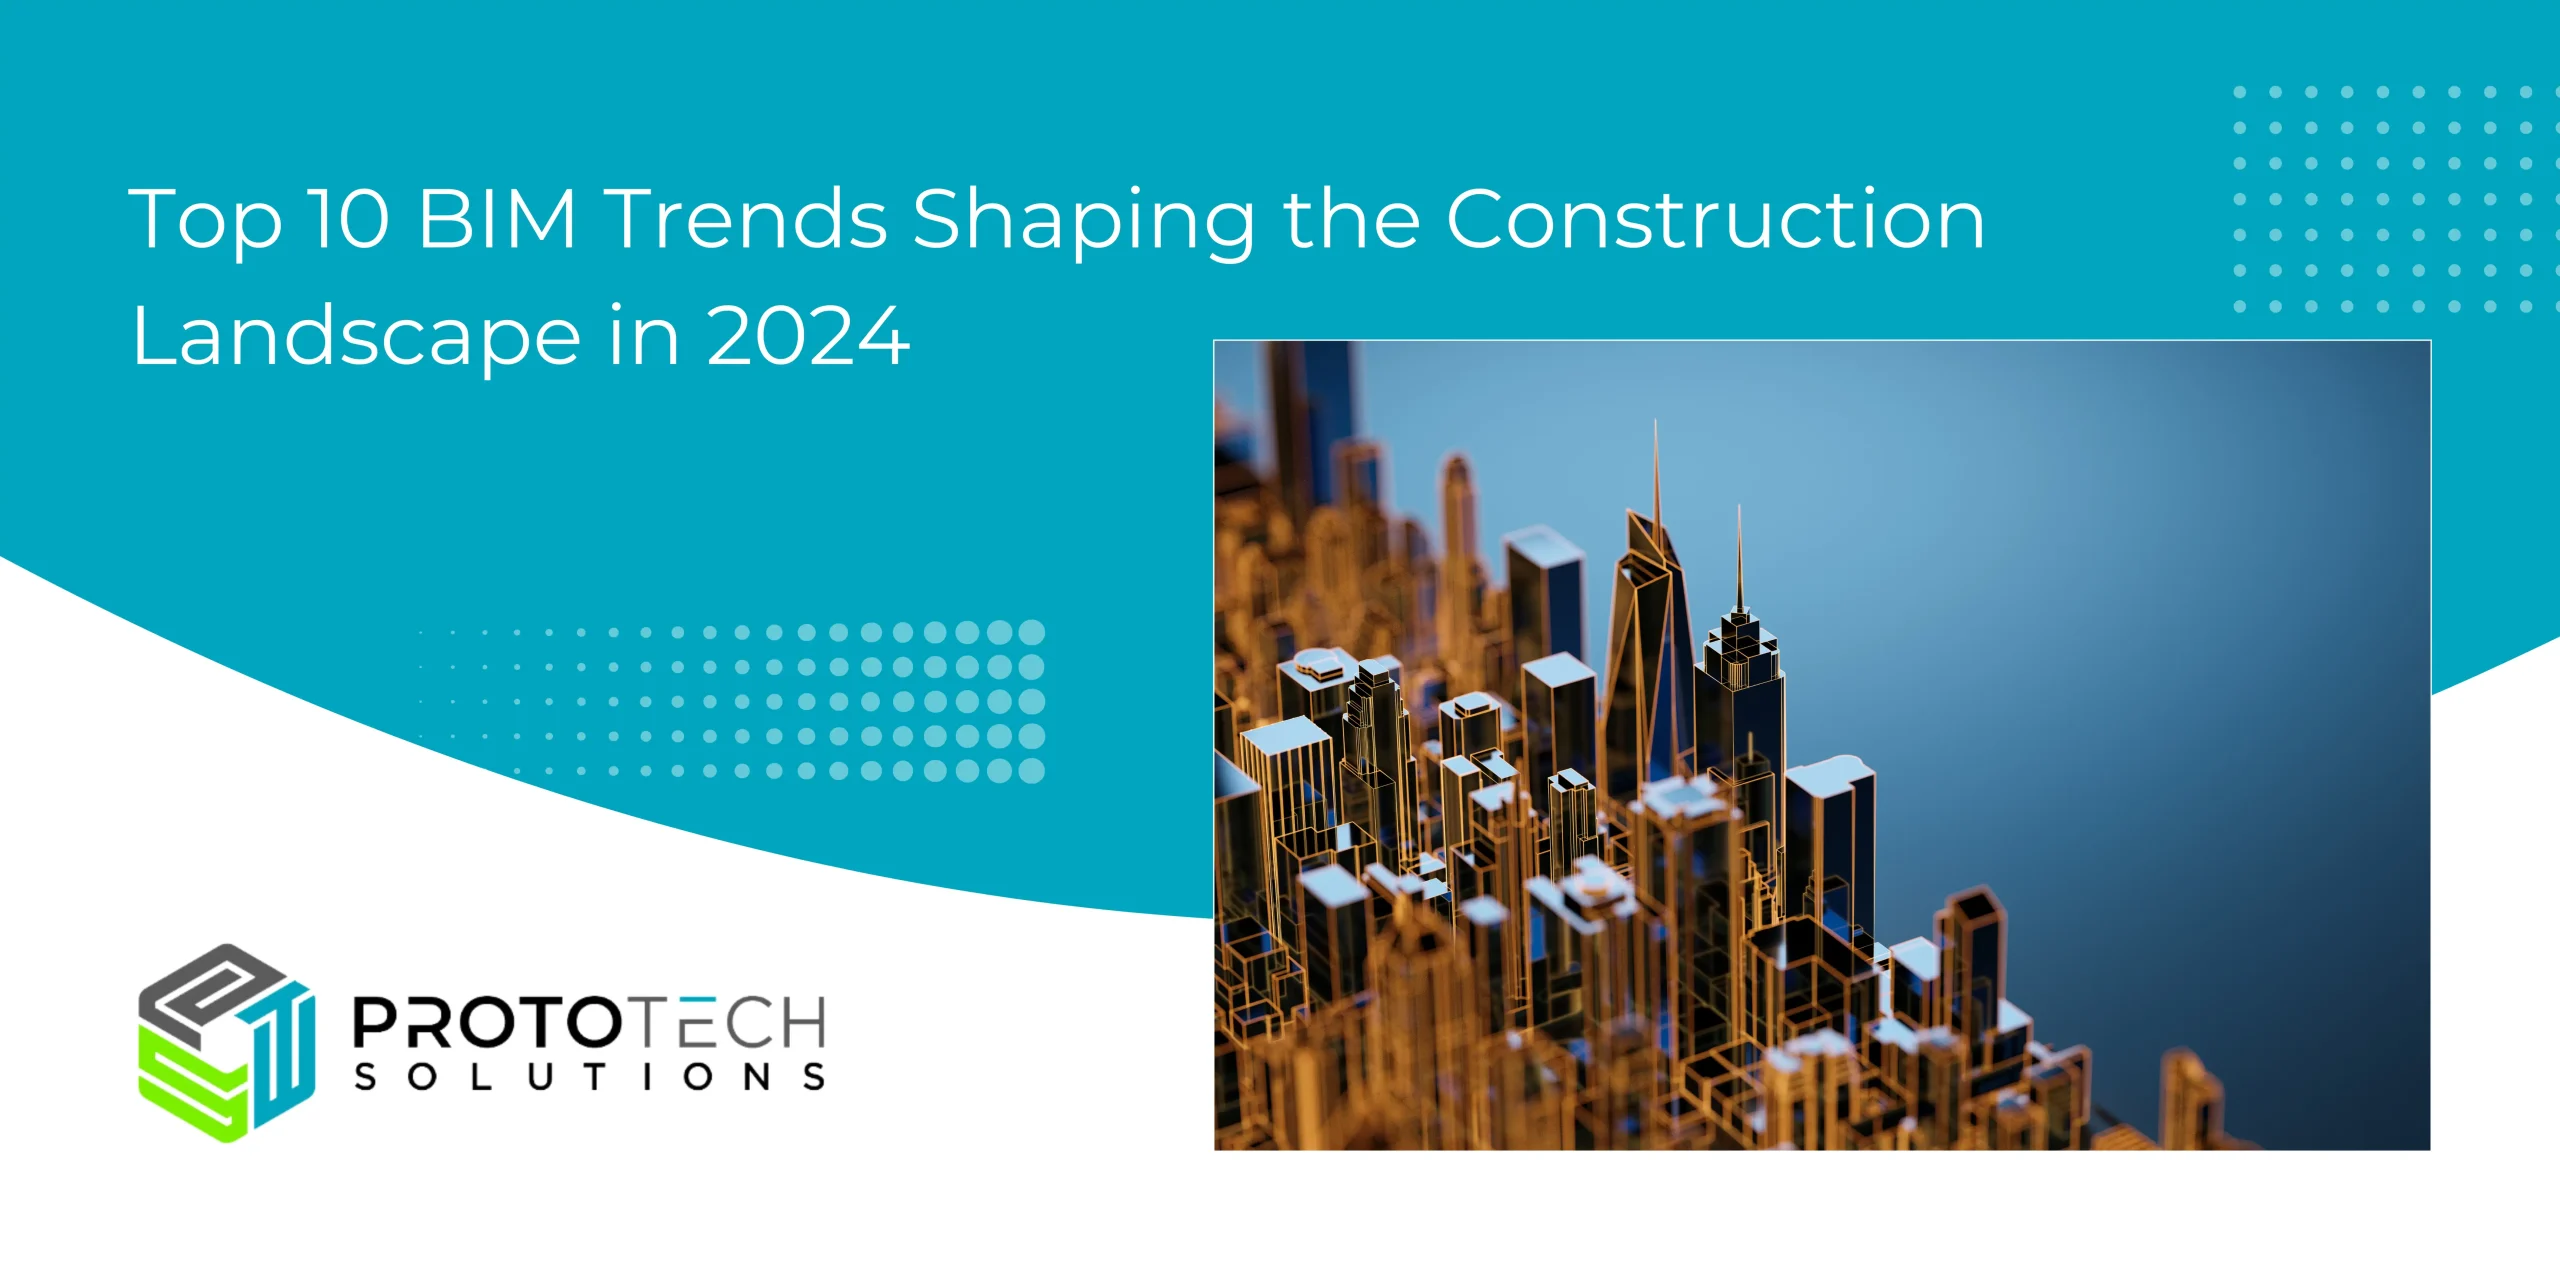 Top 10 BIM Trends Shaping the Construction Landscape in 2024